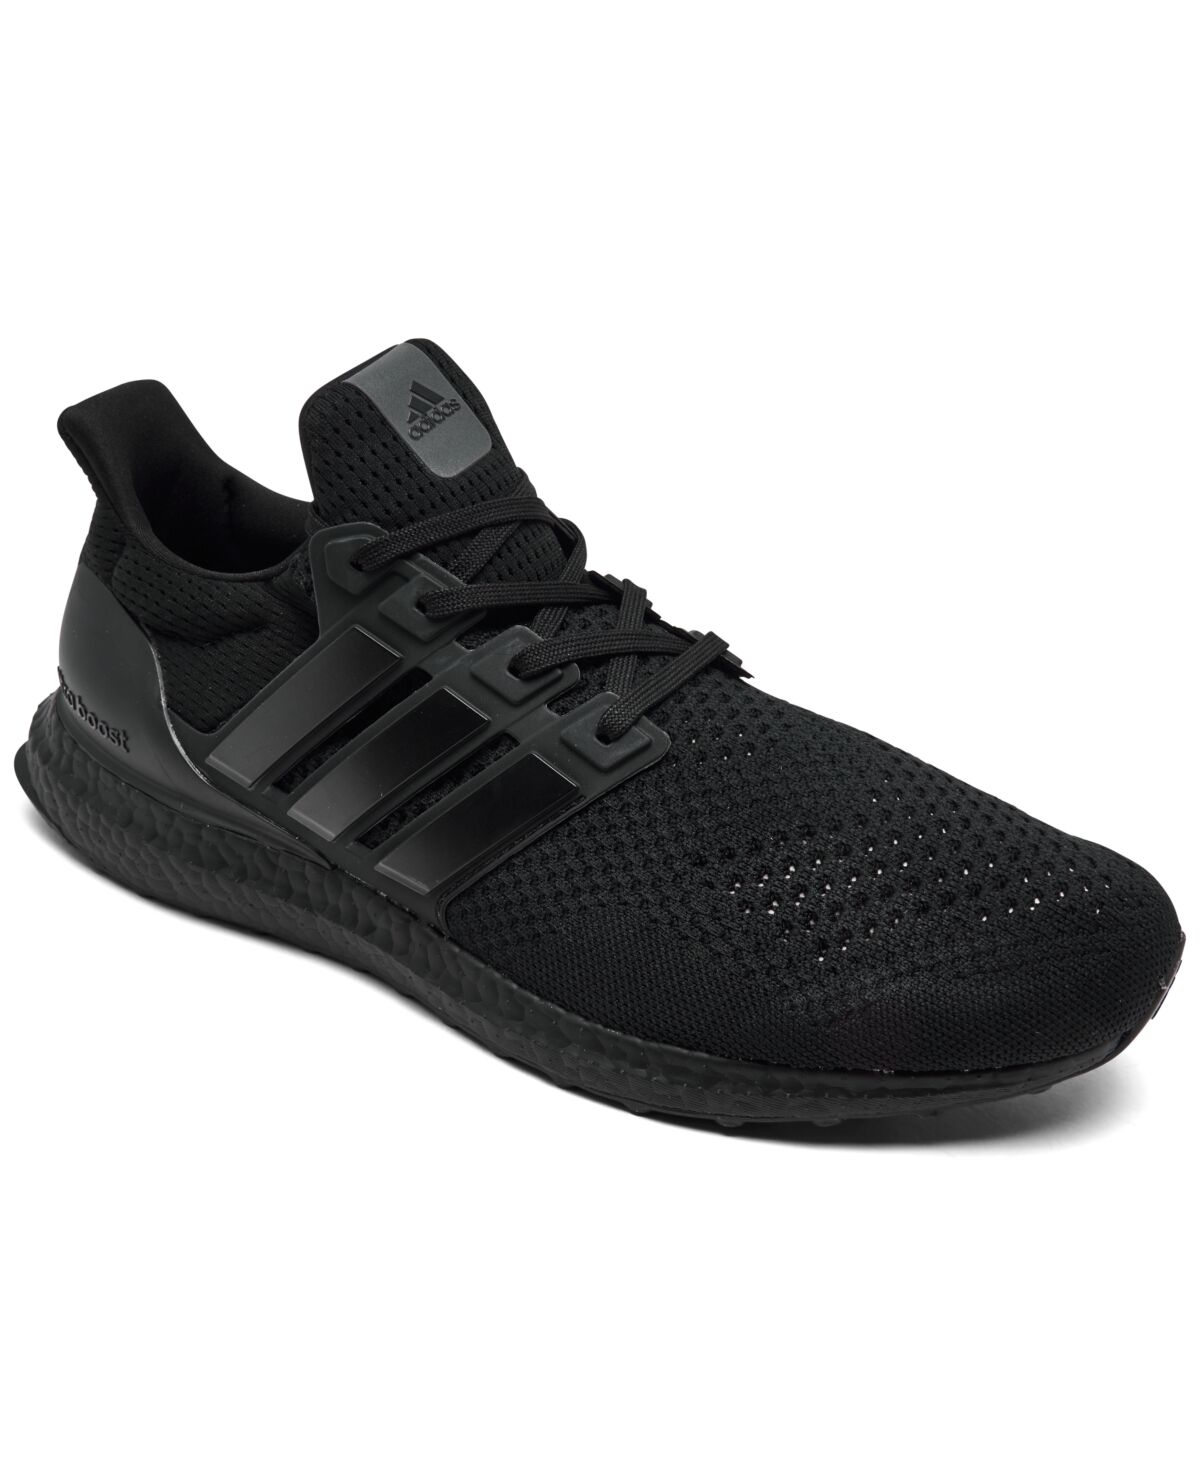 Adidas Men's UltraBOOST 1.0 Dna Running Sneakers From Finish Line - Core Black, Black